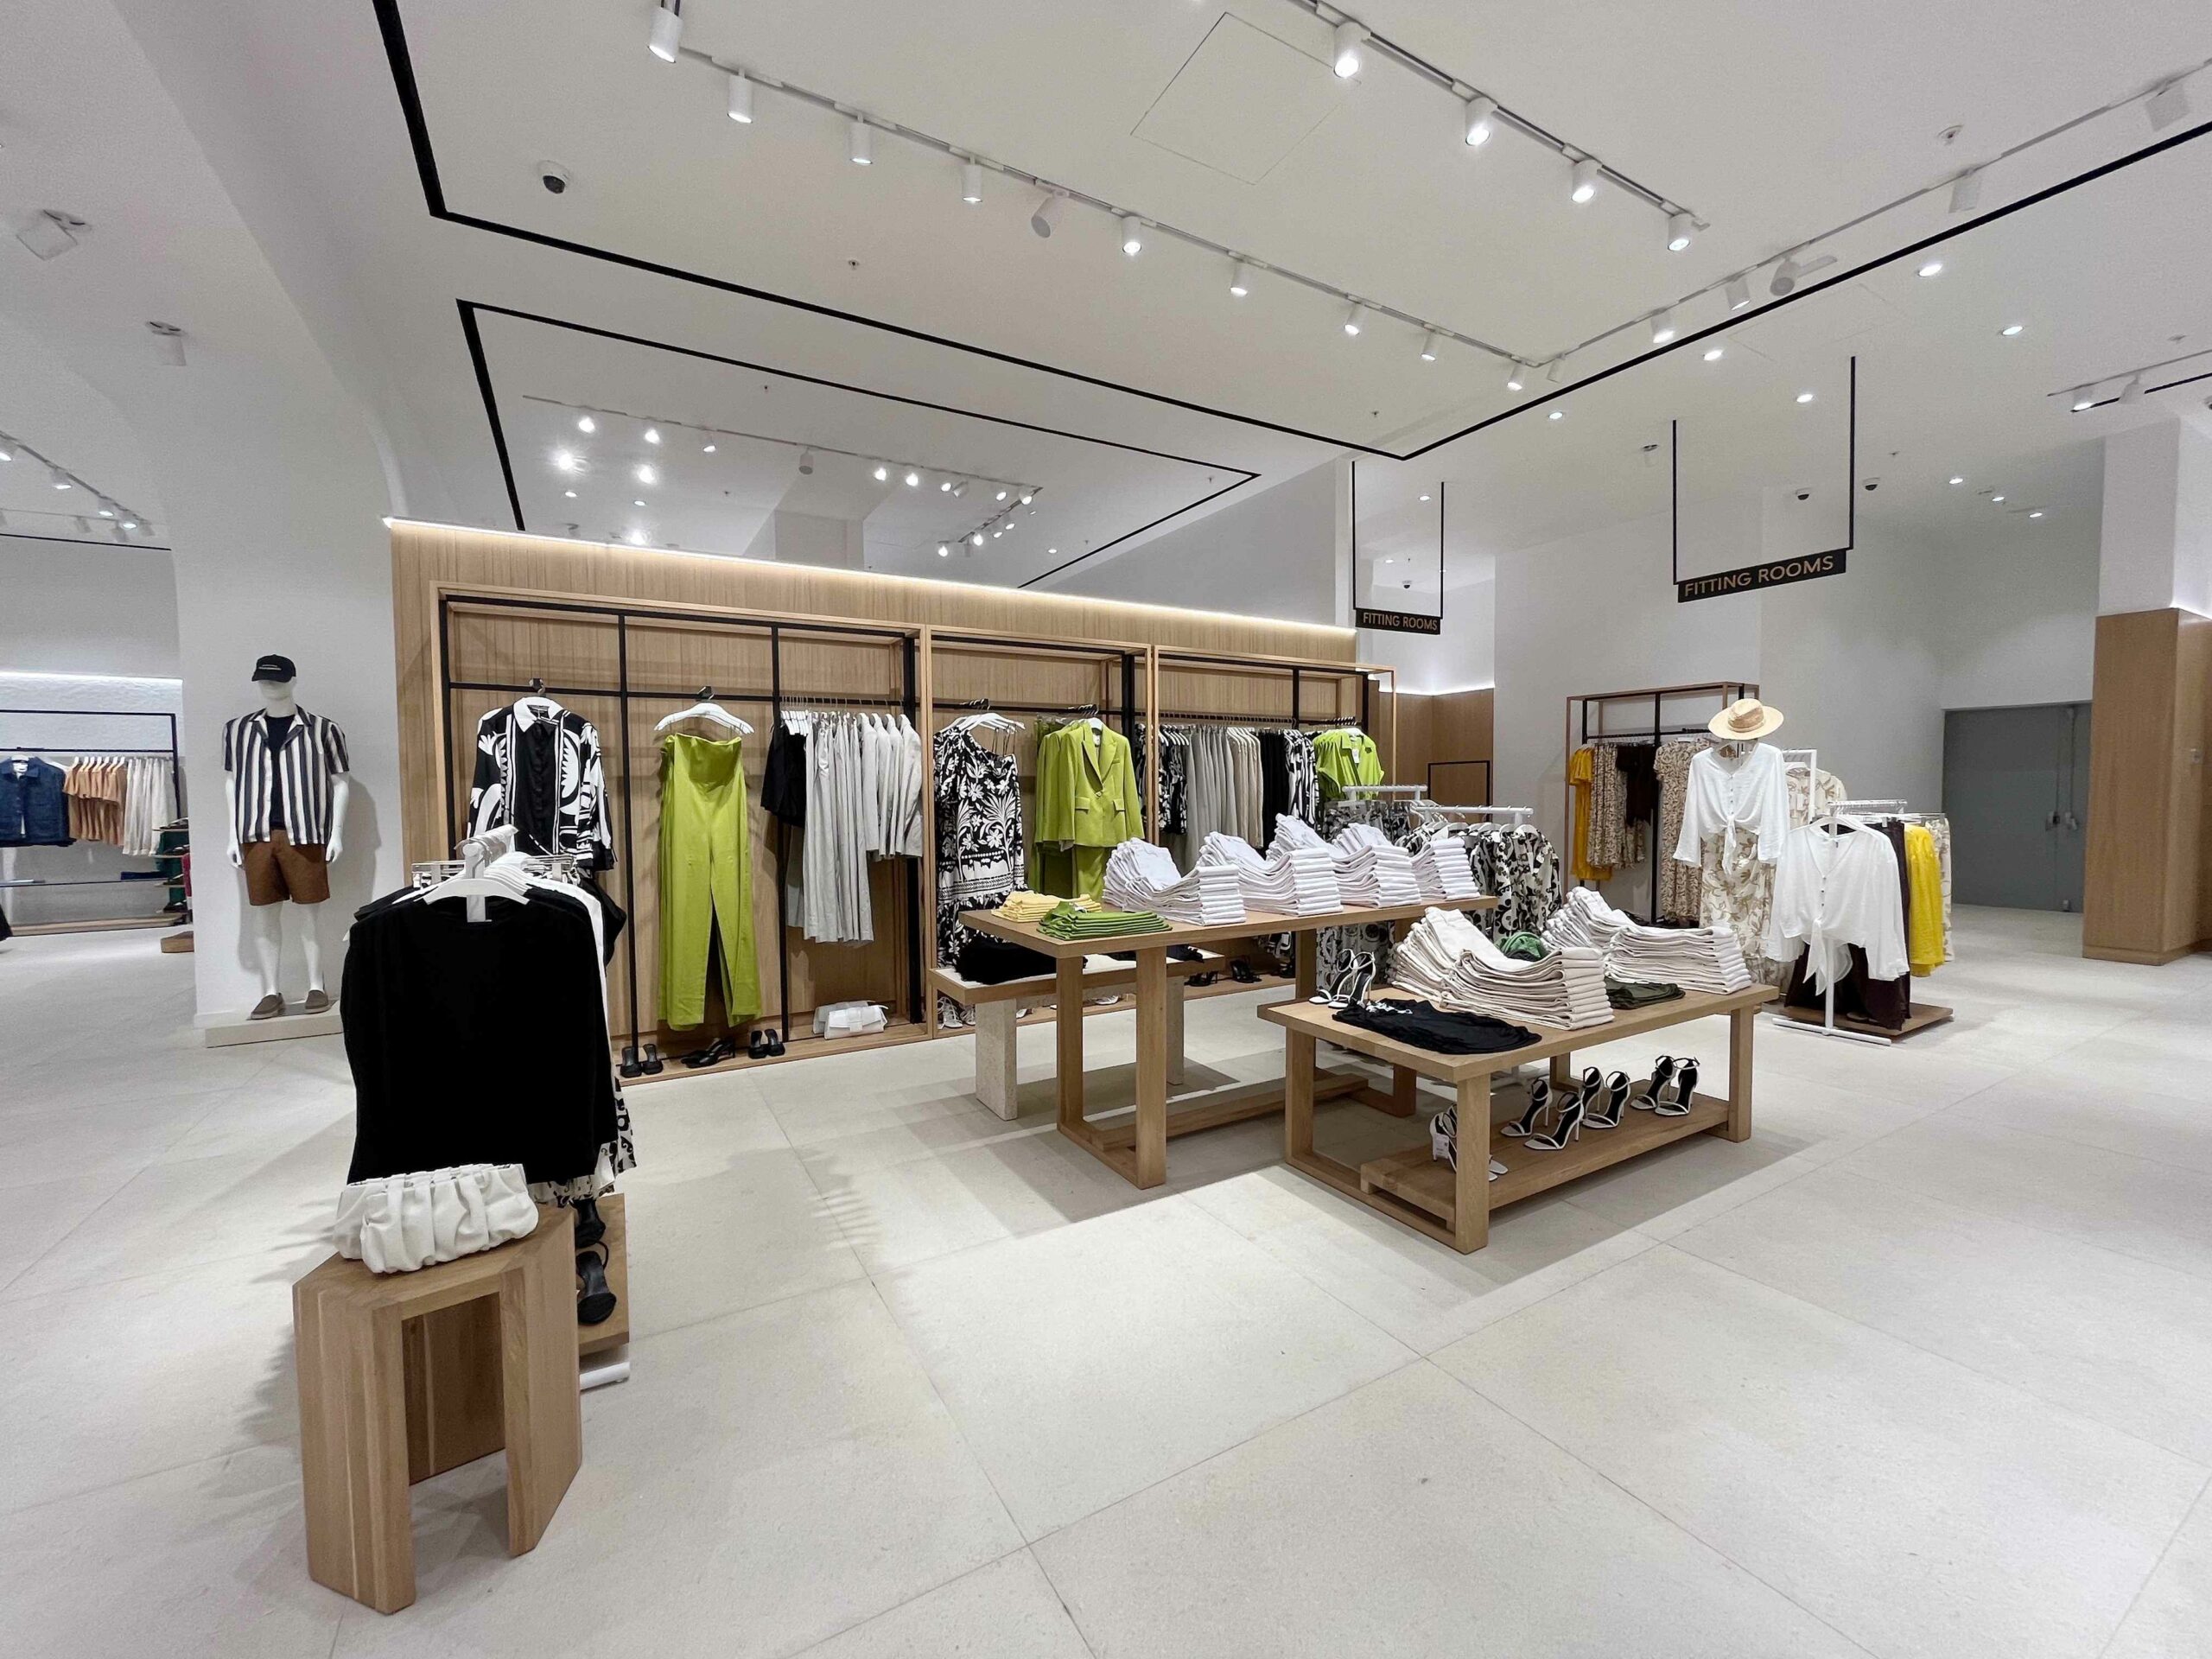 Fifth MANGO store opens its doors in Morocco - Hudson Holdings